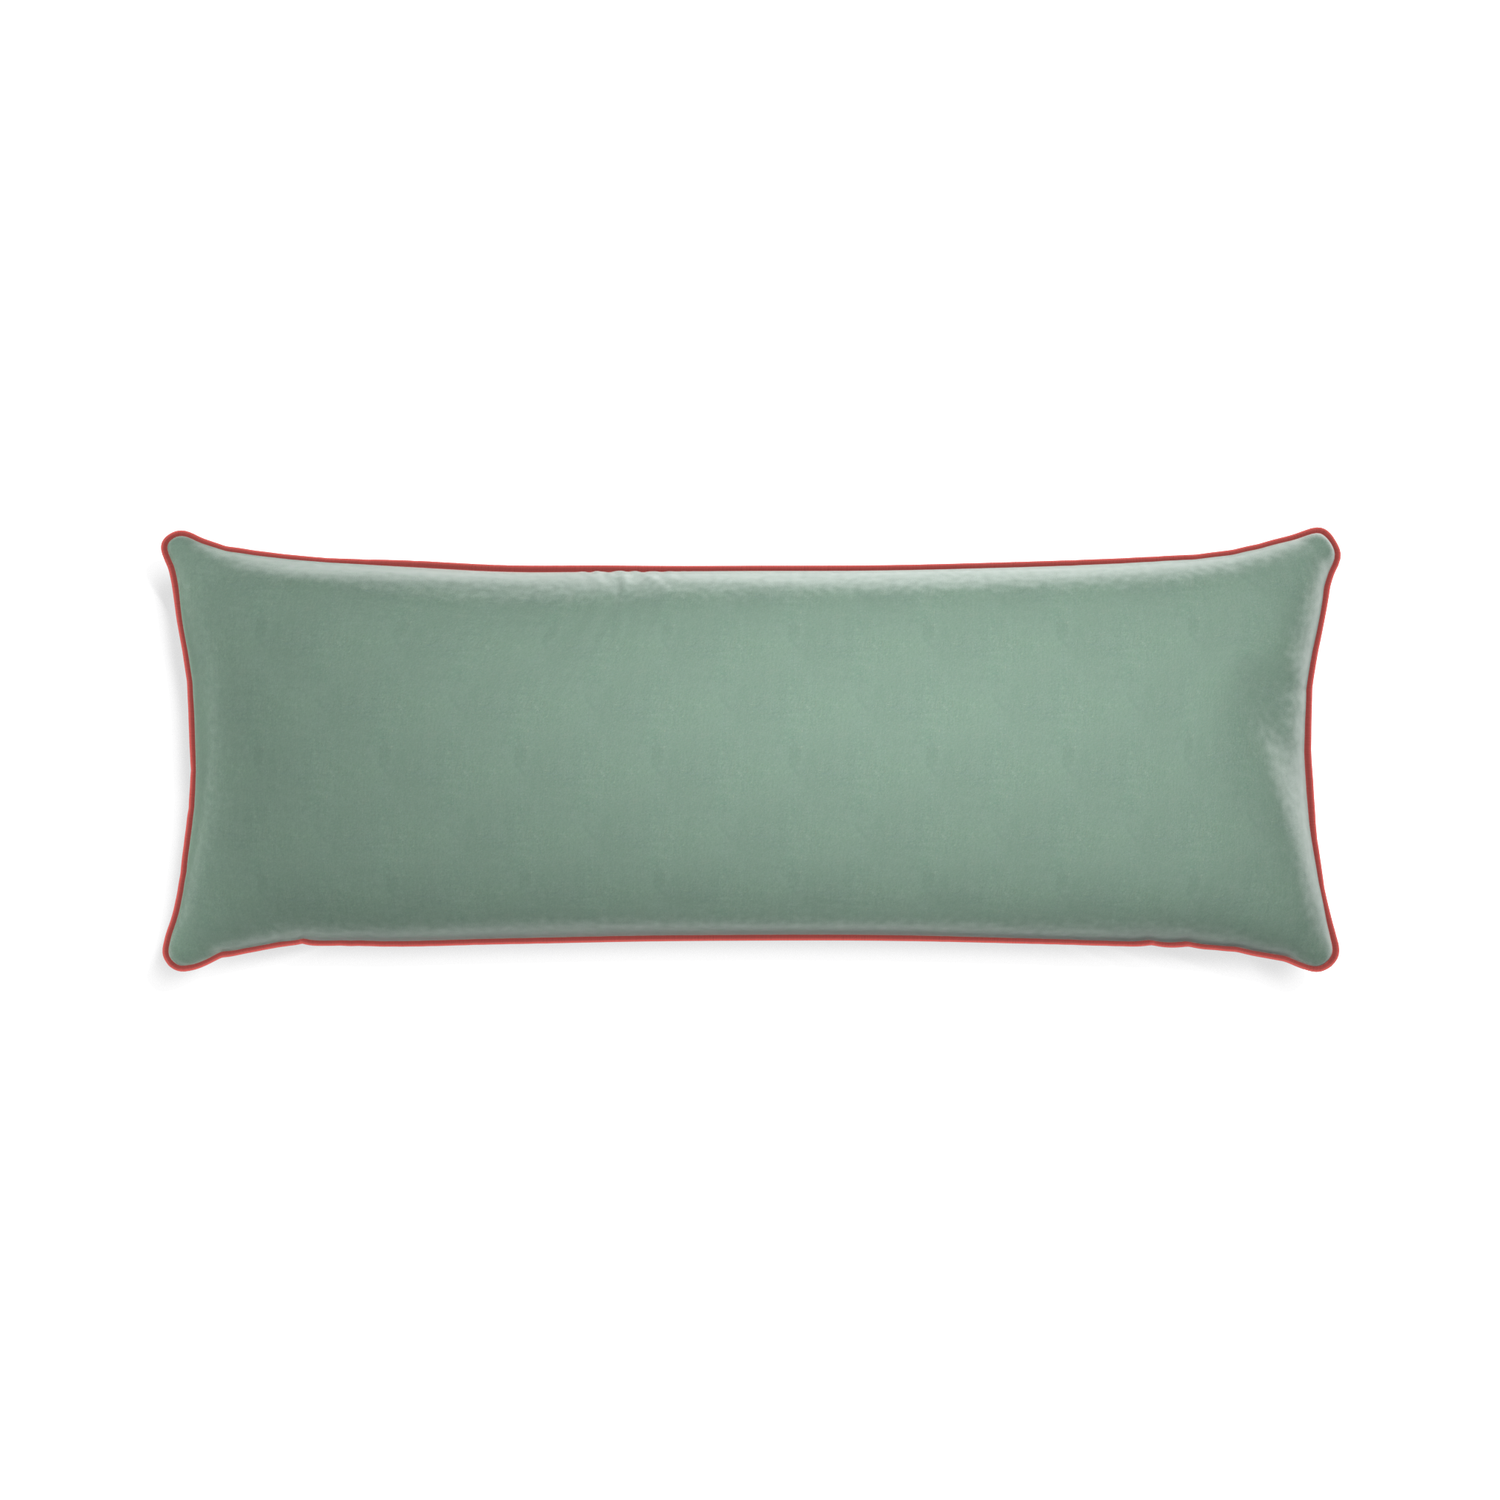 rectangle blue green velvet pillow with coral piping